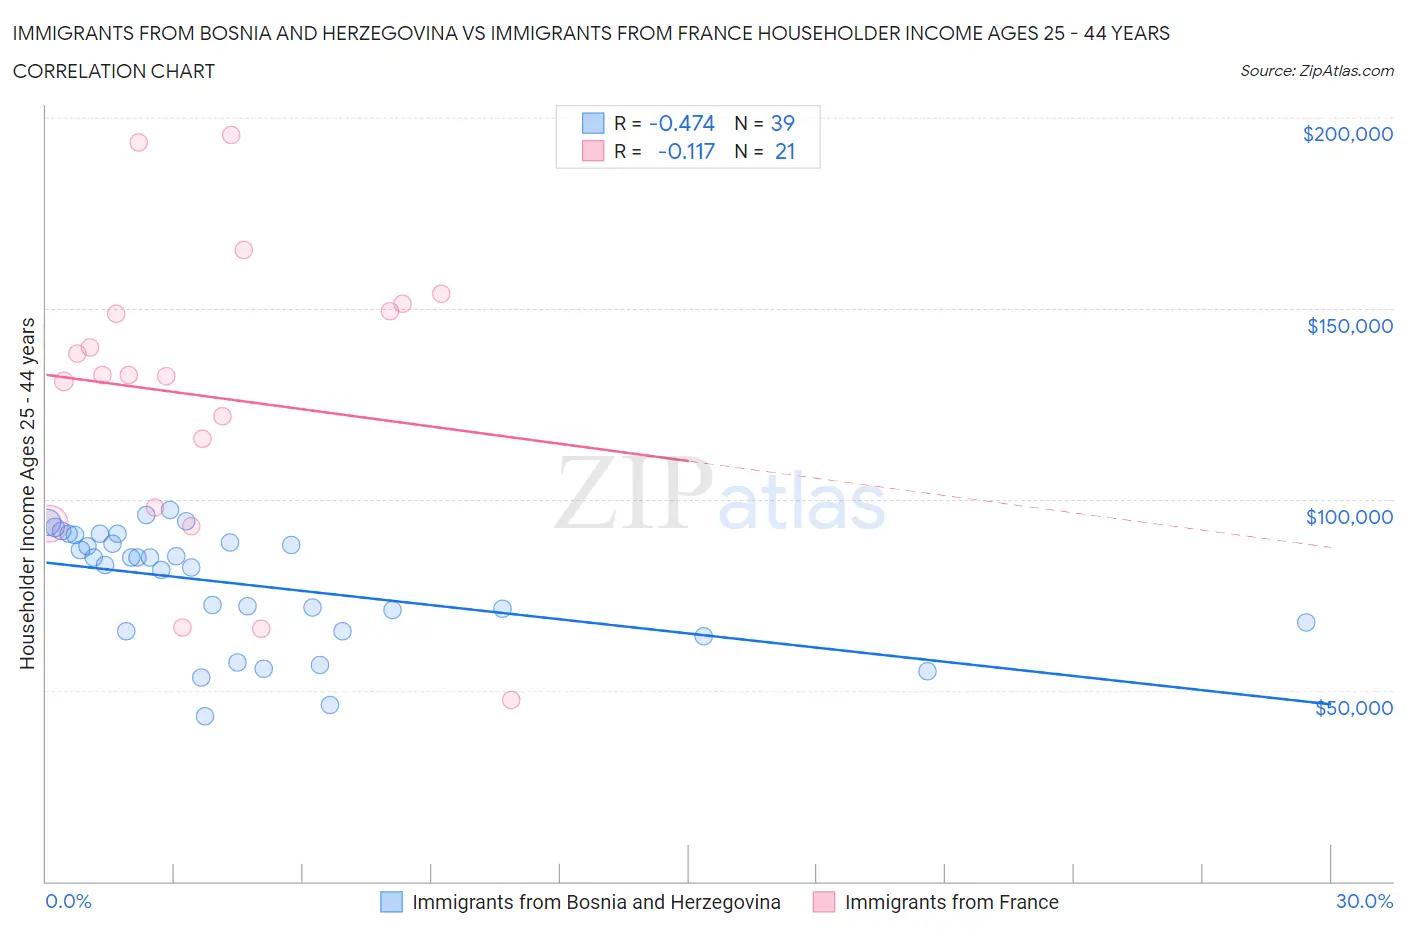 Immigrants from Bosnia and Herzegovina vs Immigrants from France Householder Income Ages 25 - 44 years